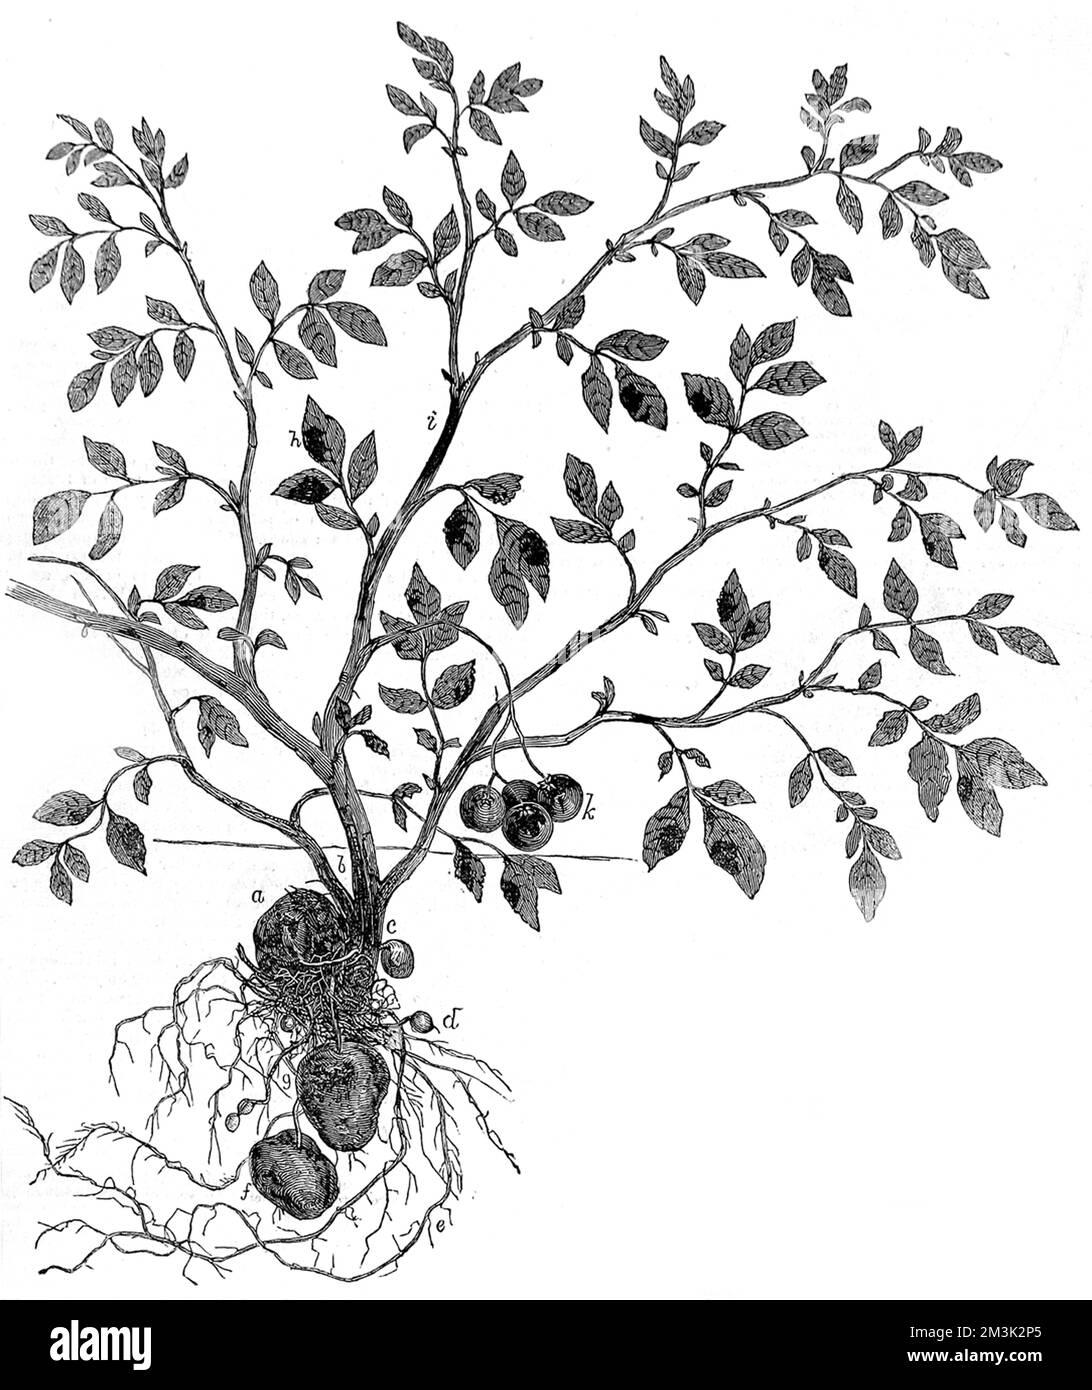 The onset of disease in the potato plant. The potato crop was the staple diet of the Irish rural population. When potato blight resulted in a ruined crop in 1846, over 1 million Irish citizens died, with a further 1-2 million emigrating. A general view of the plant with roots, tubers, fruits, or apples and leaves.   1846 Stock Photo